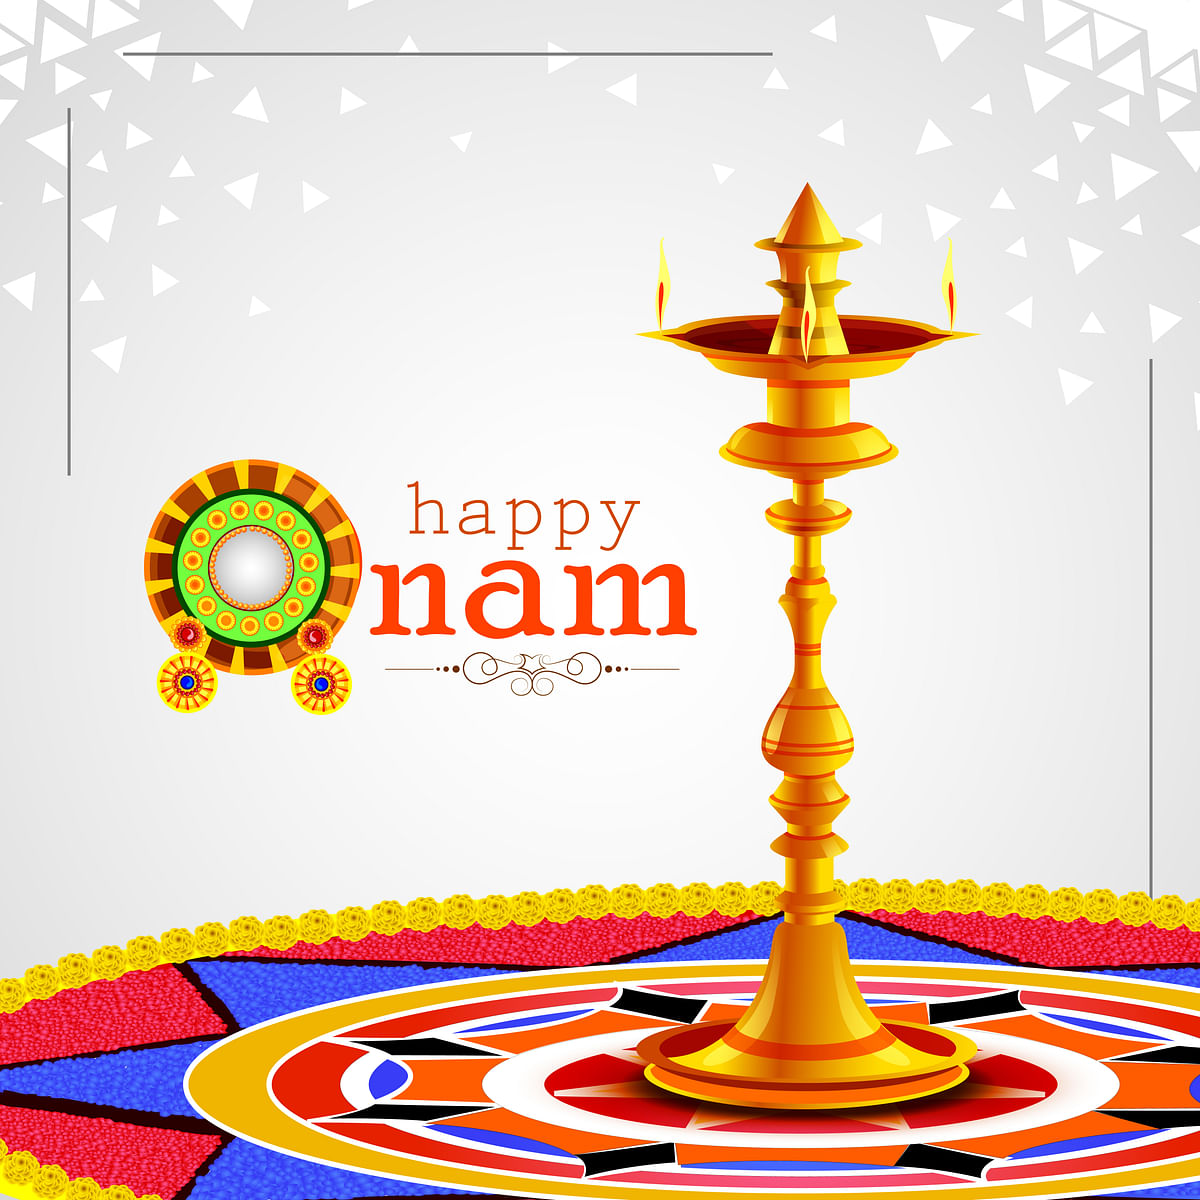 Here are some images, quote and messages to send your friends, relatives and peers on this auspicious occasion.